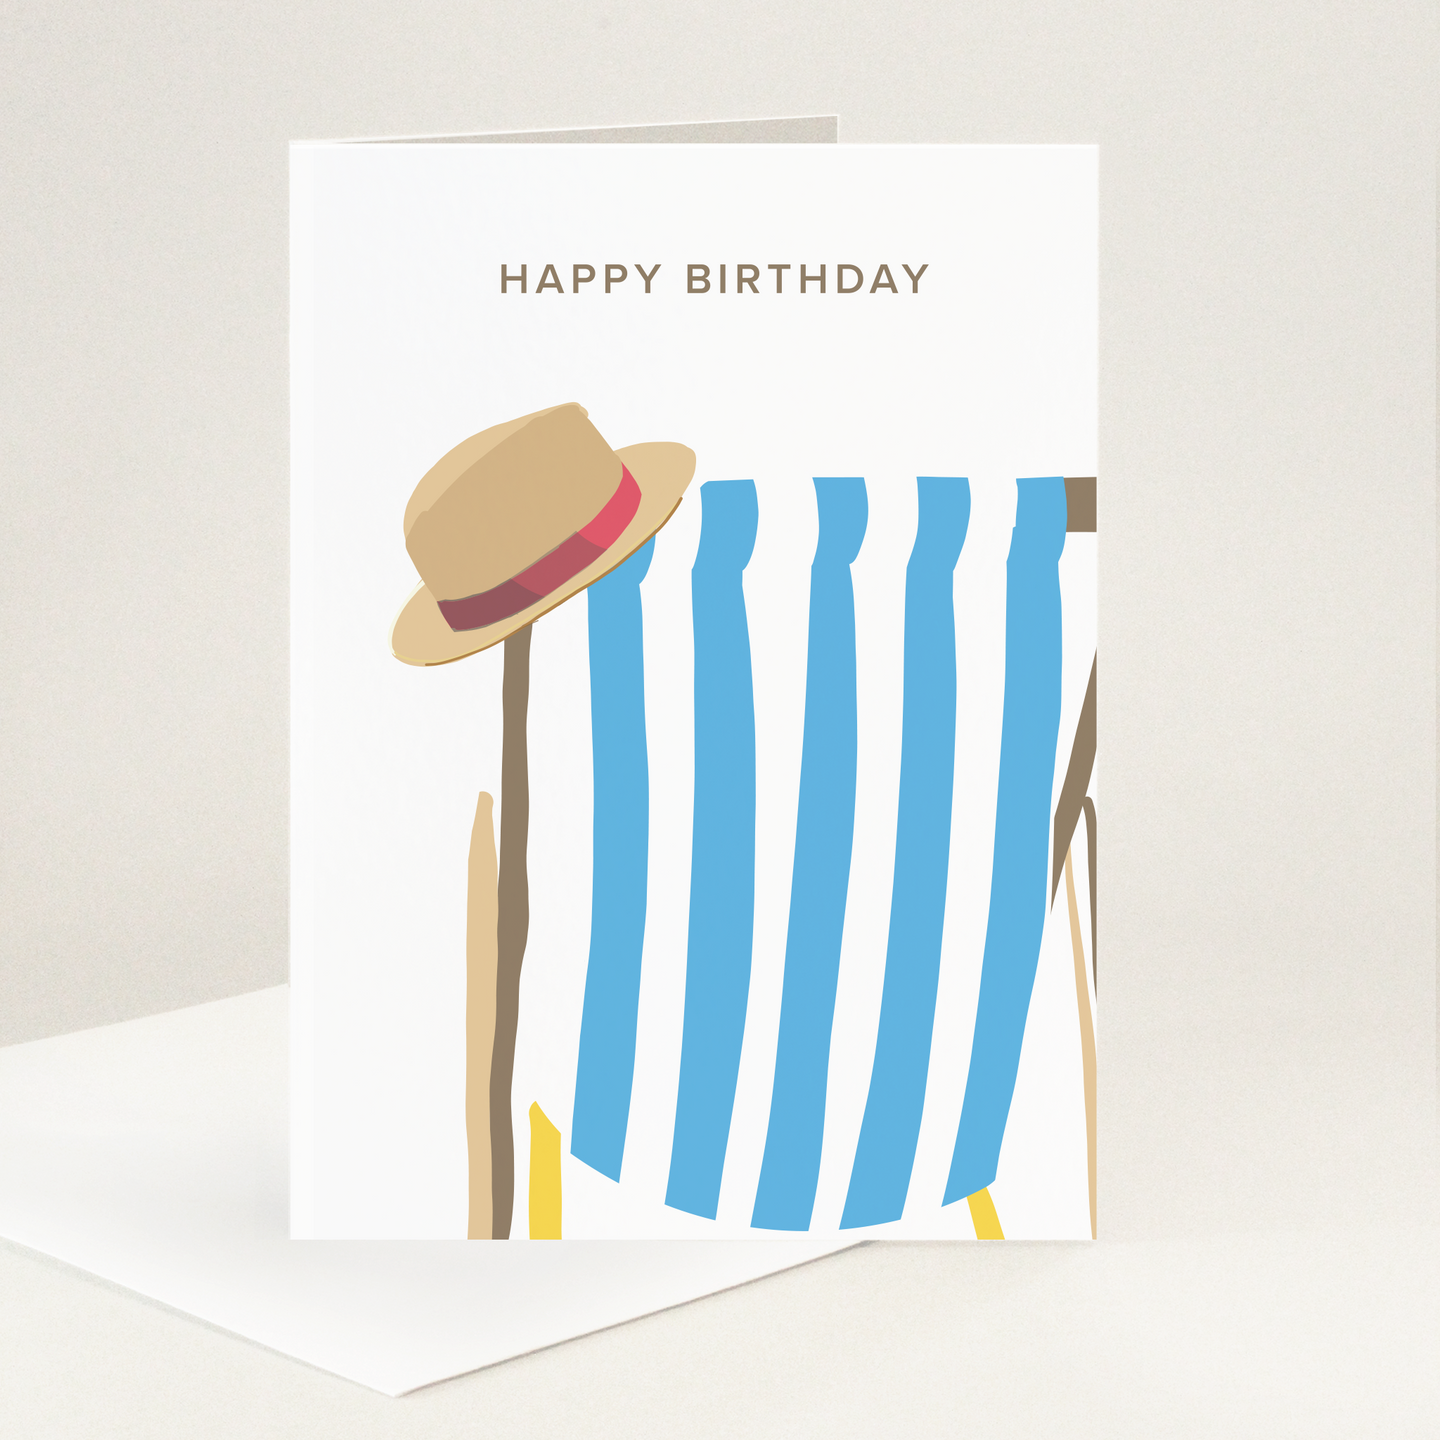 Happy Birthday message above a blue and white striped deckchair with a summer hat perched on the top